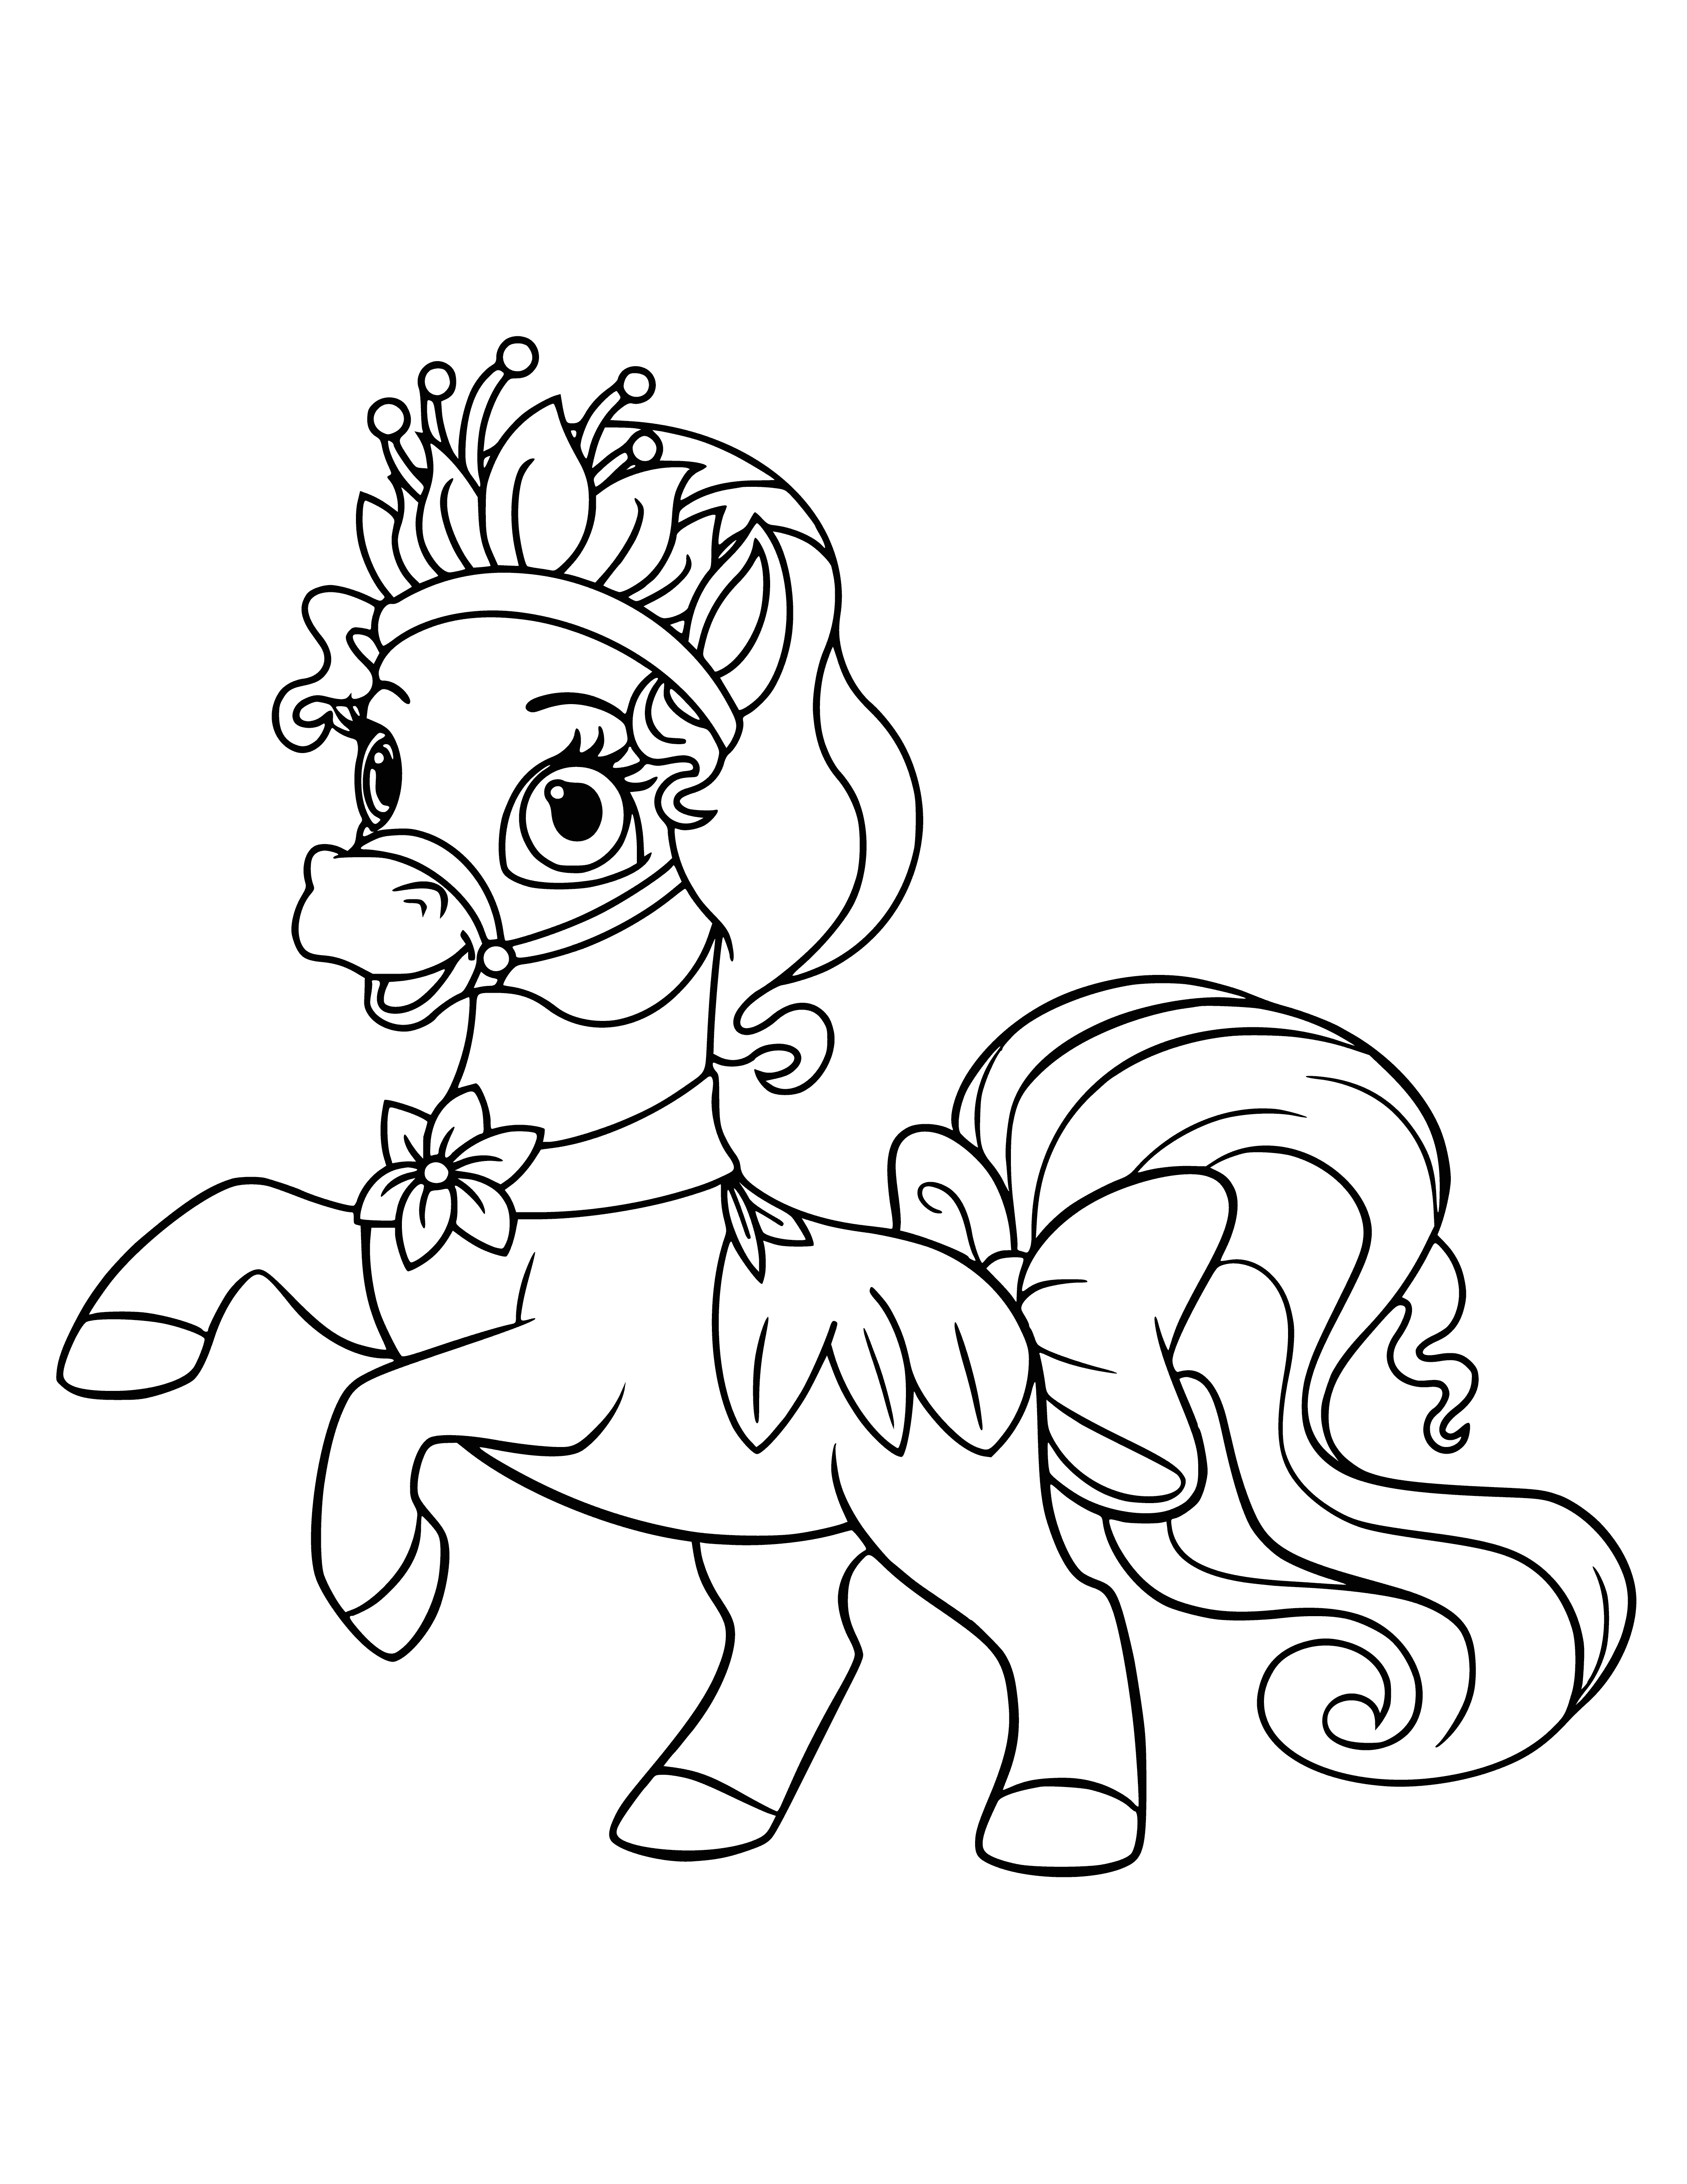 coloring page: A pony with light-colored mane/tail standing in water surrounded by greenery, a striped coat, and a white flower in its mouth.